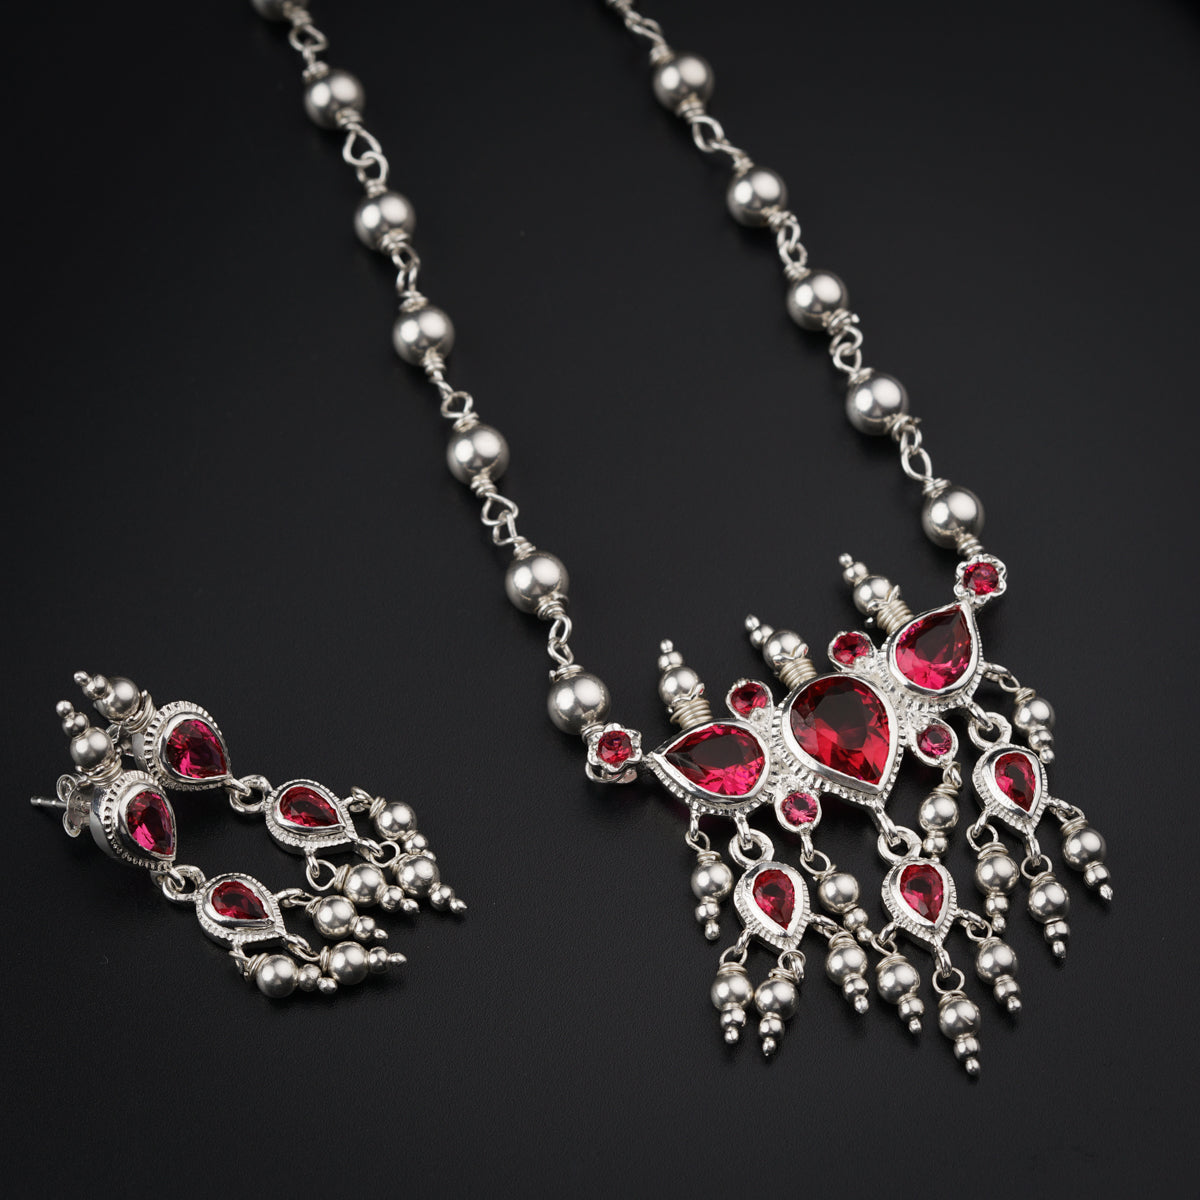 a close up of a necklace and earrings on a table